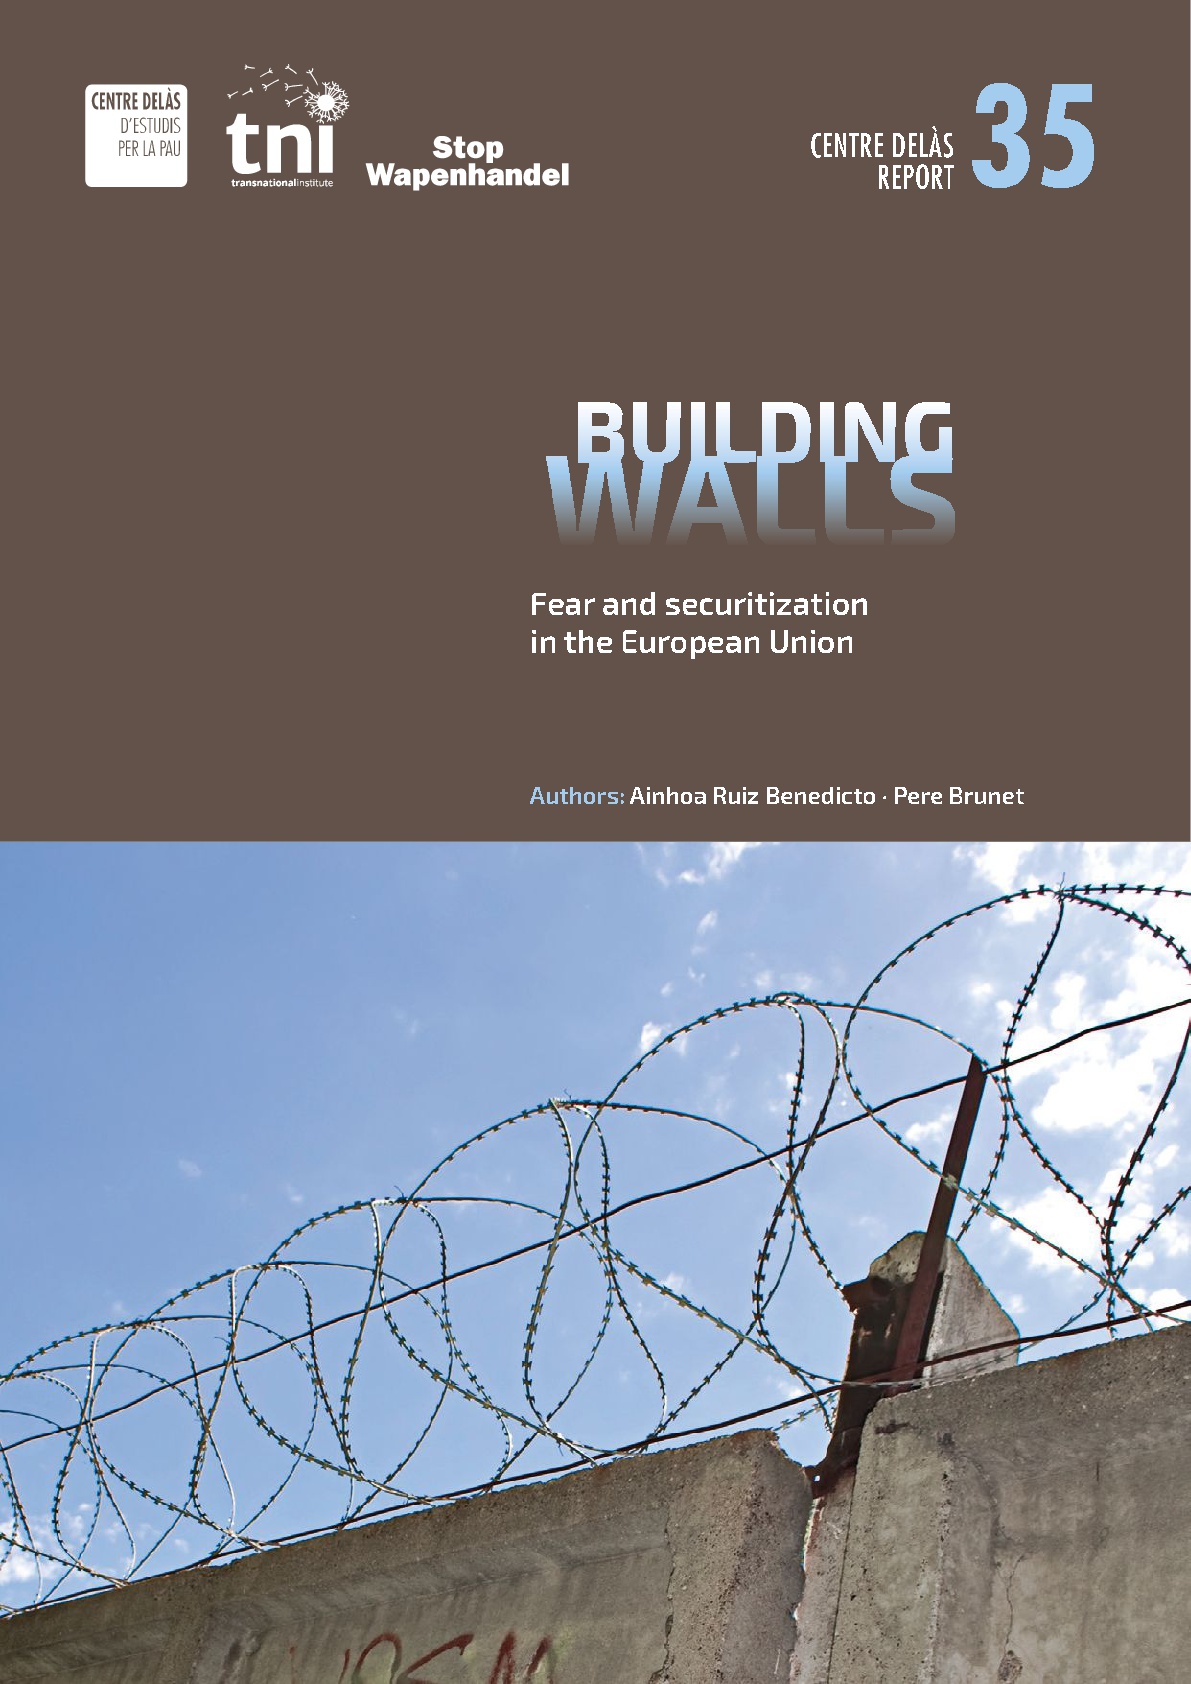 Report 35: Building Walls. Policies of fear and securitization in the European Union